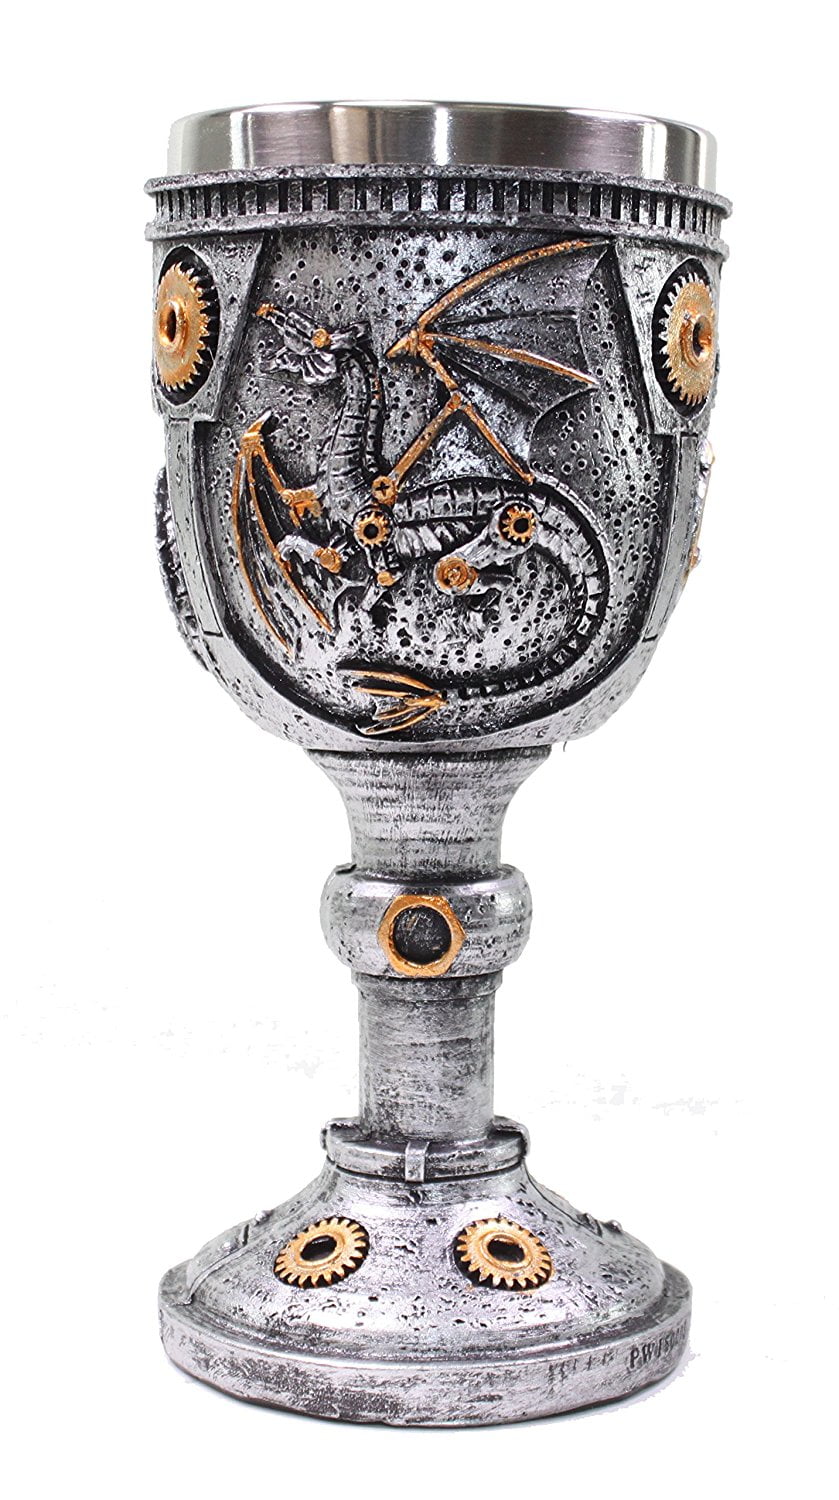 Mythical Silver Royal Dragon Wine Goblet Skulls Steampunk with Gears ...